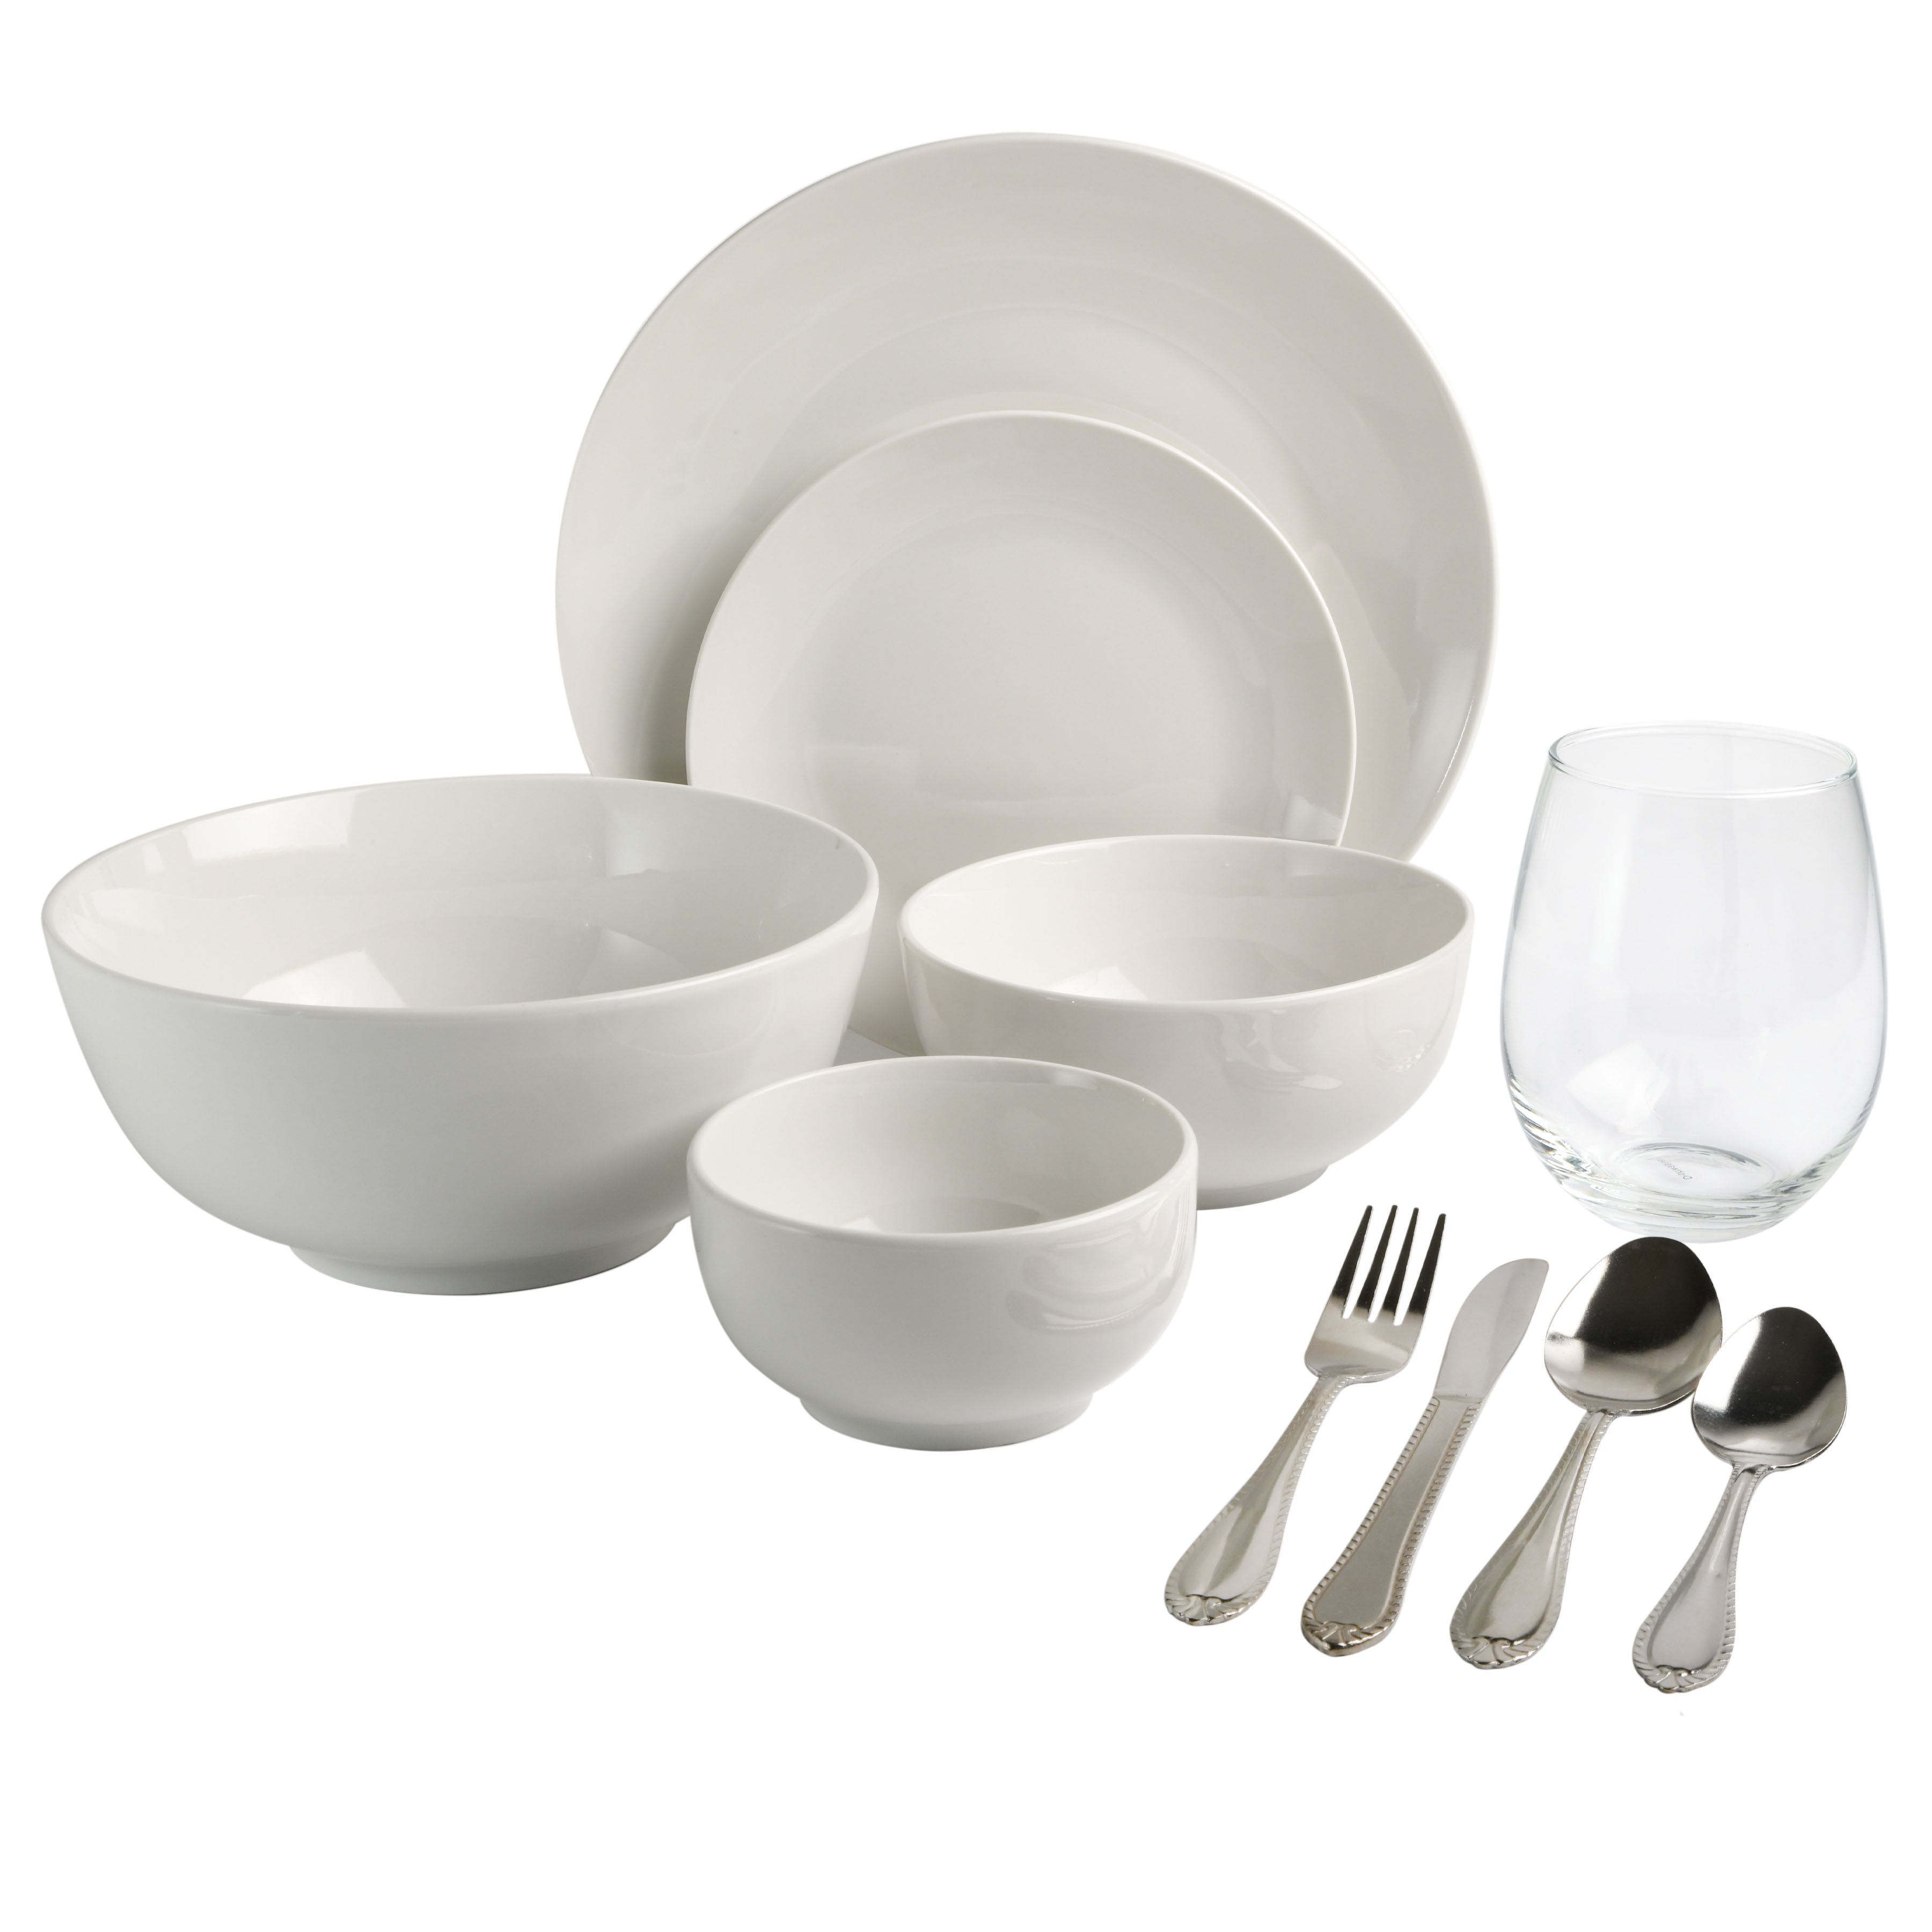 Gibson Home All U Need 60 Piece Plates, Bowls, Glassware, Forks, Spoons, and Knives (Service for 6) Dinnerware Set